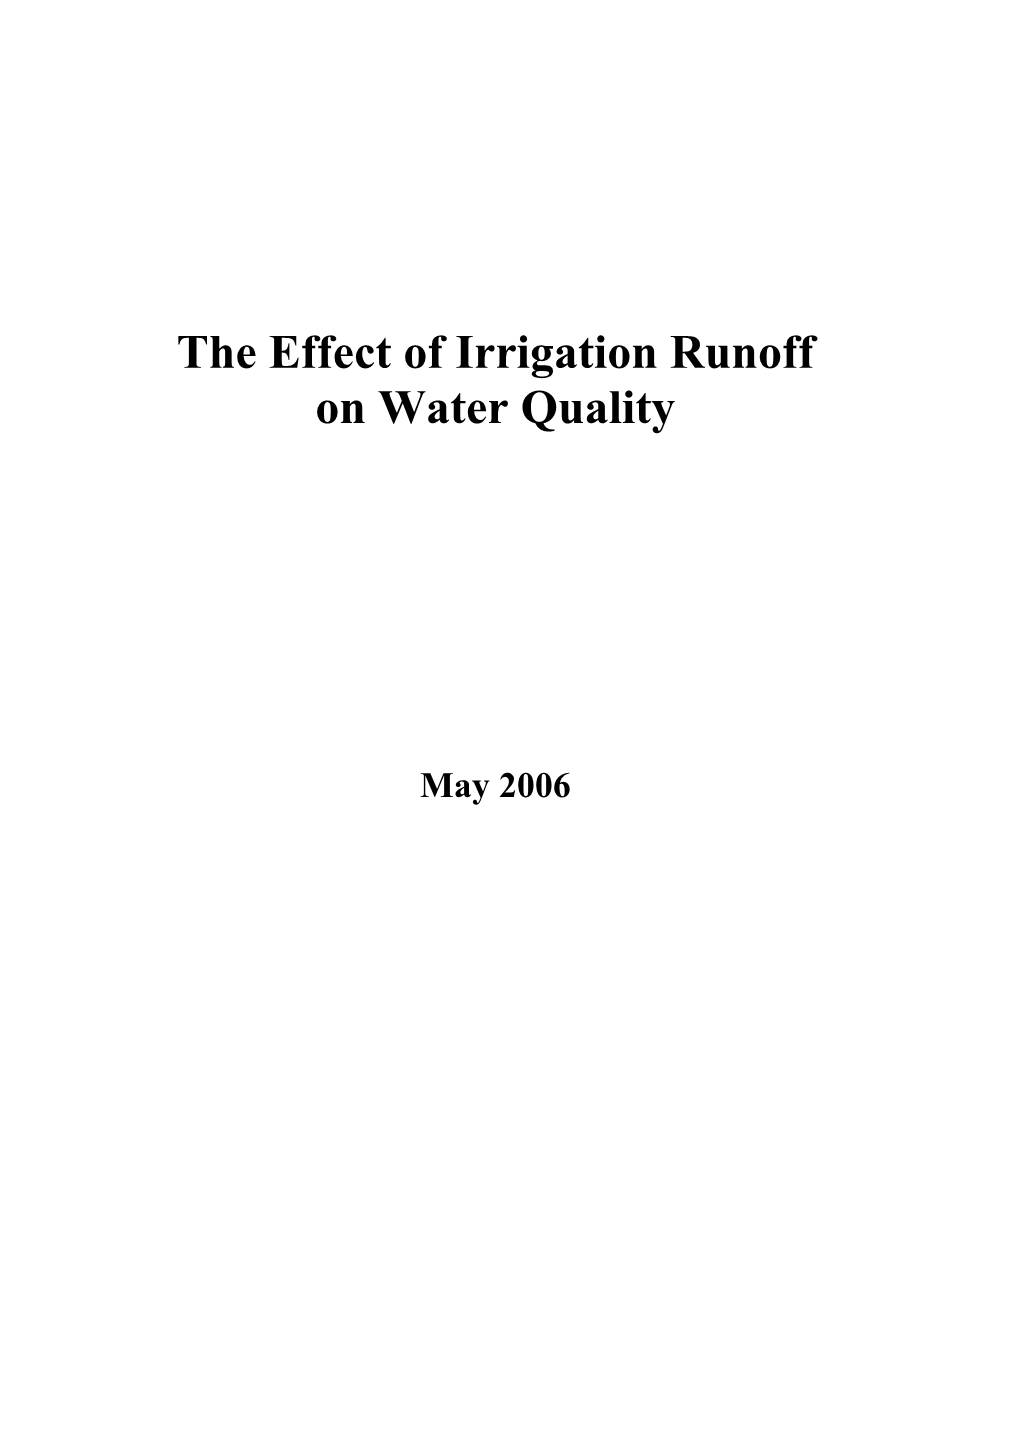 The Effect of Irrigation Runoff on Water Quality